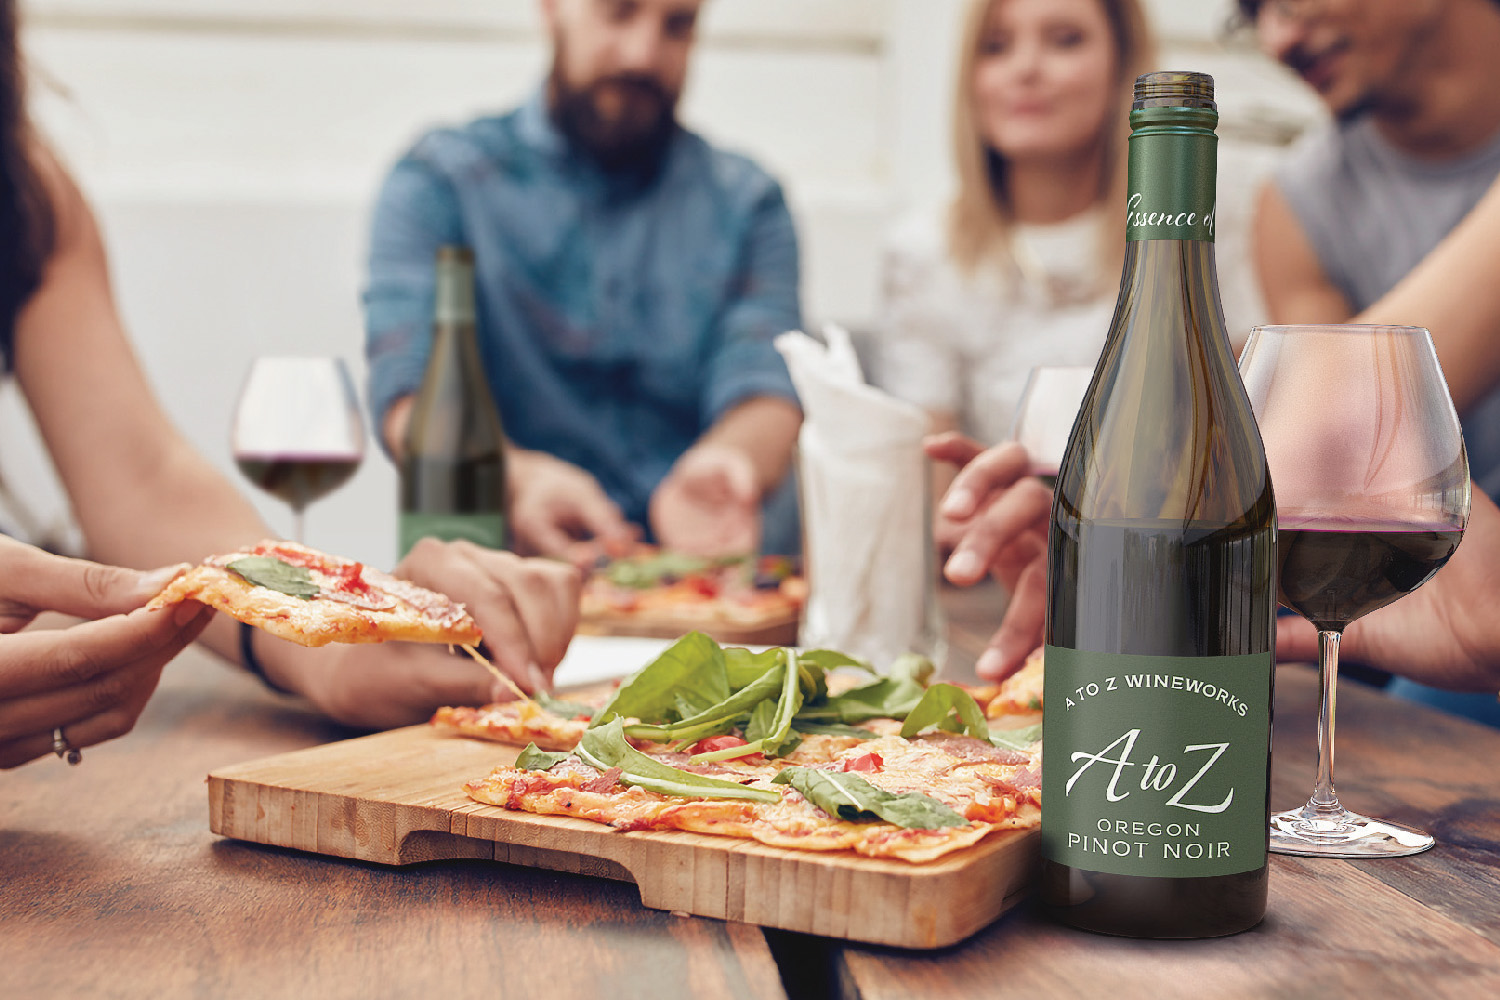 A to Z Pinot Noir with pizza at party